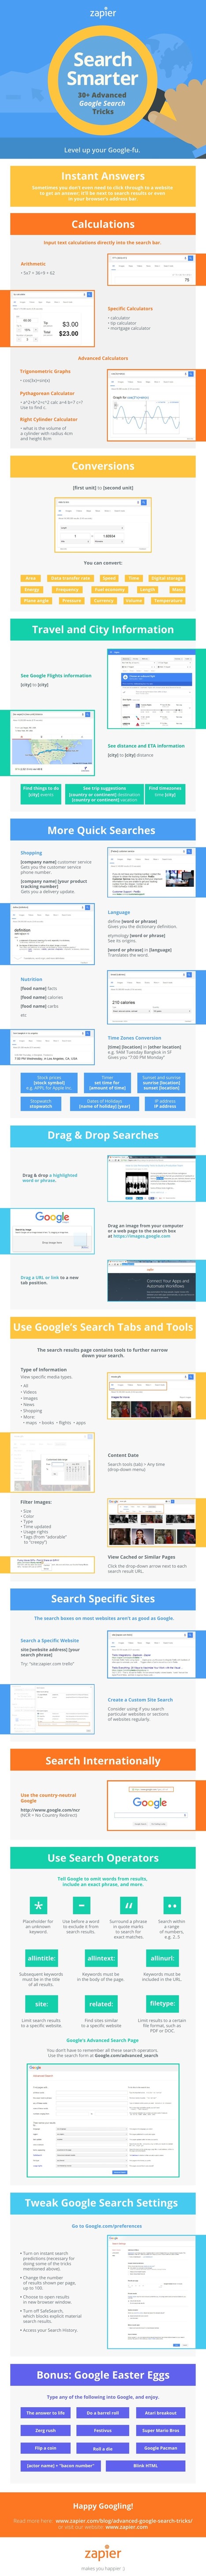 A New Infographic Featuring 30+ Practical Google Search Tips ~ Educational Technology and Mobile Learning | Strictly pedagogical | Scoop.it